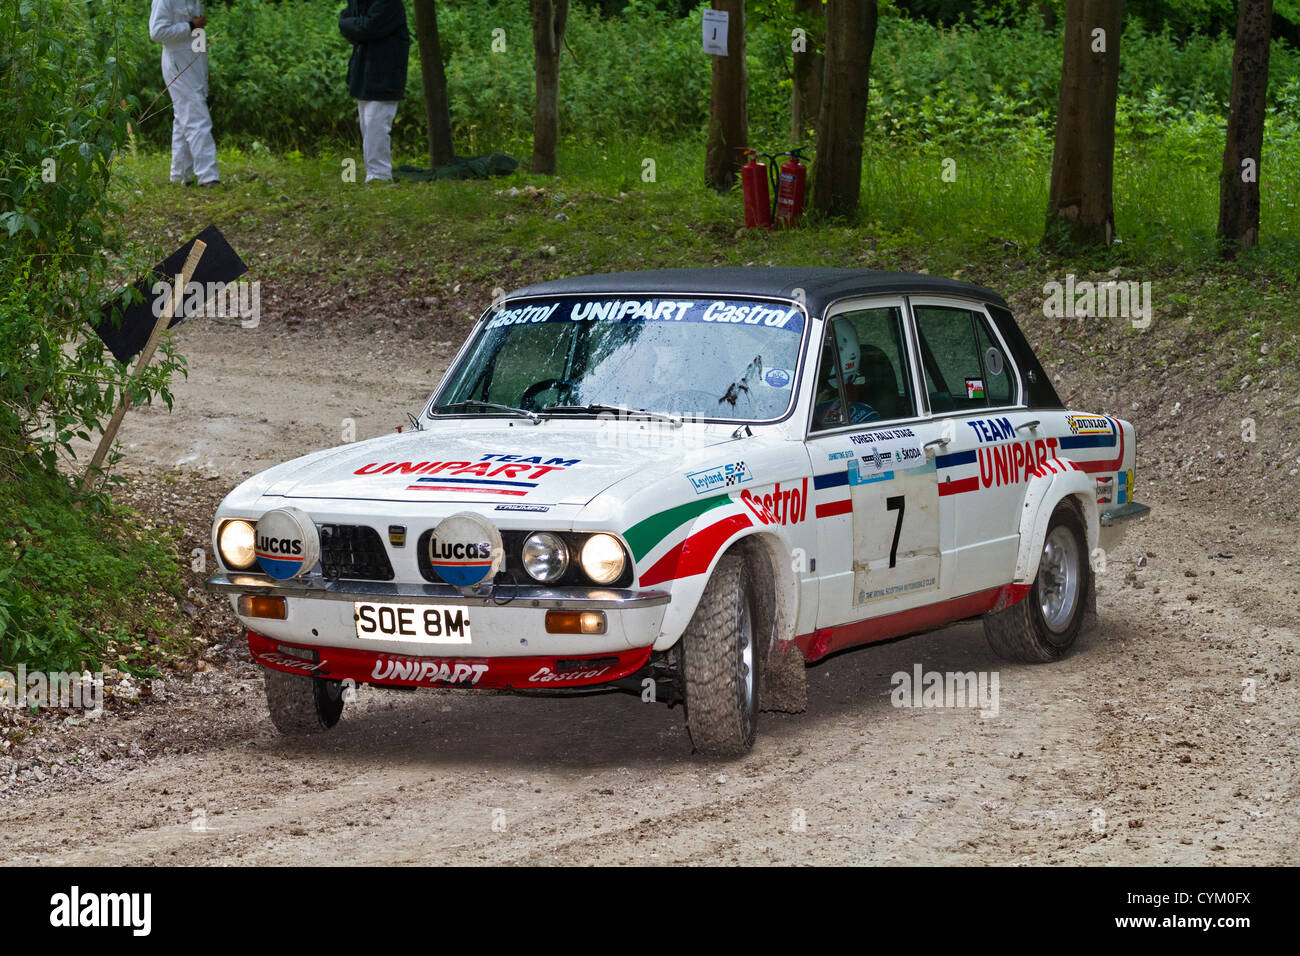 Triumph Dolomite Sprint High Resolution Stock Photography and Images - Alamy